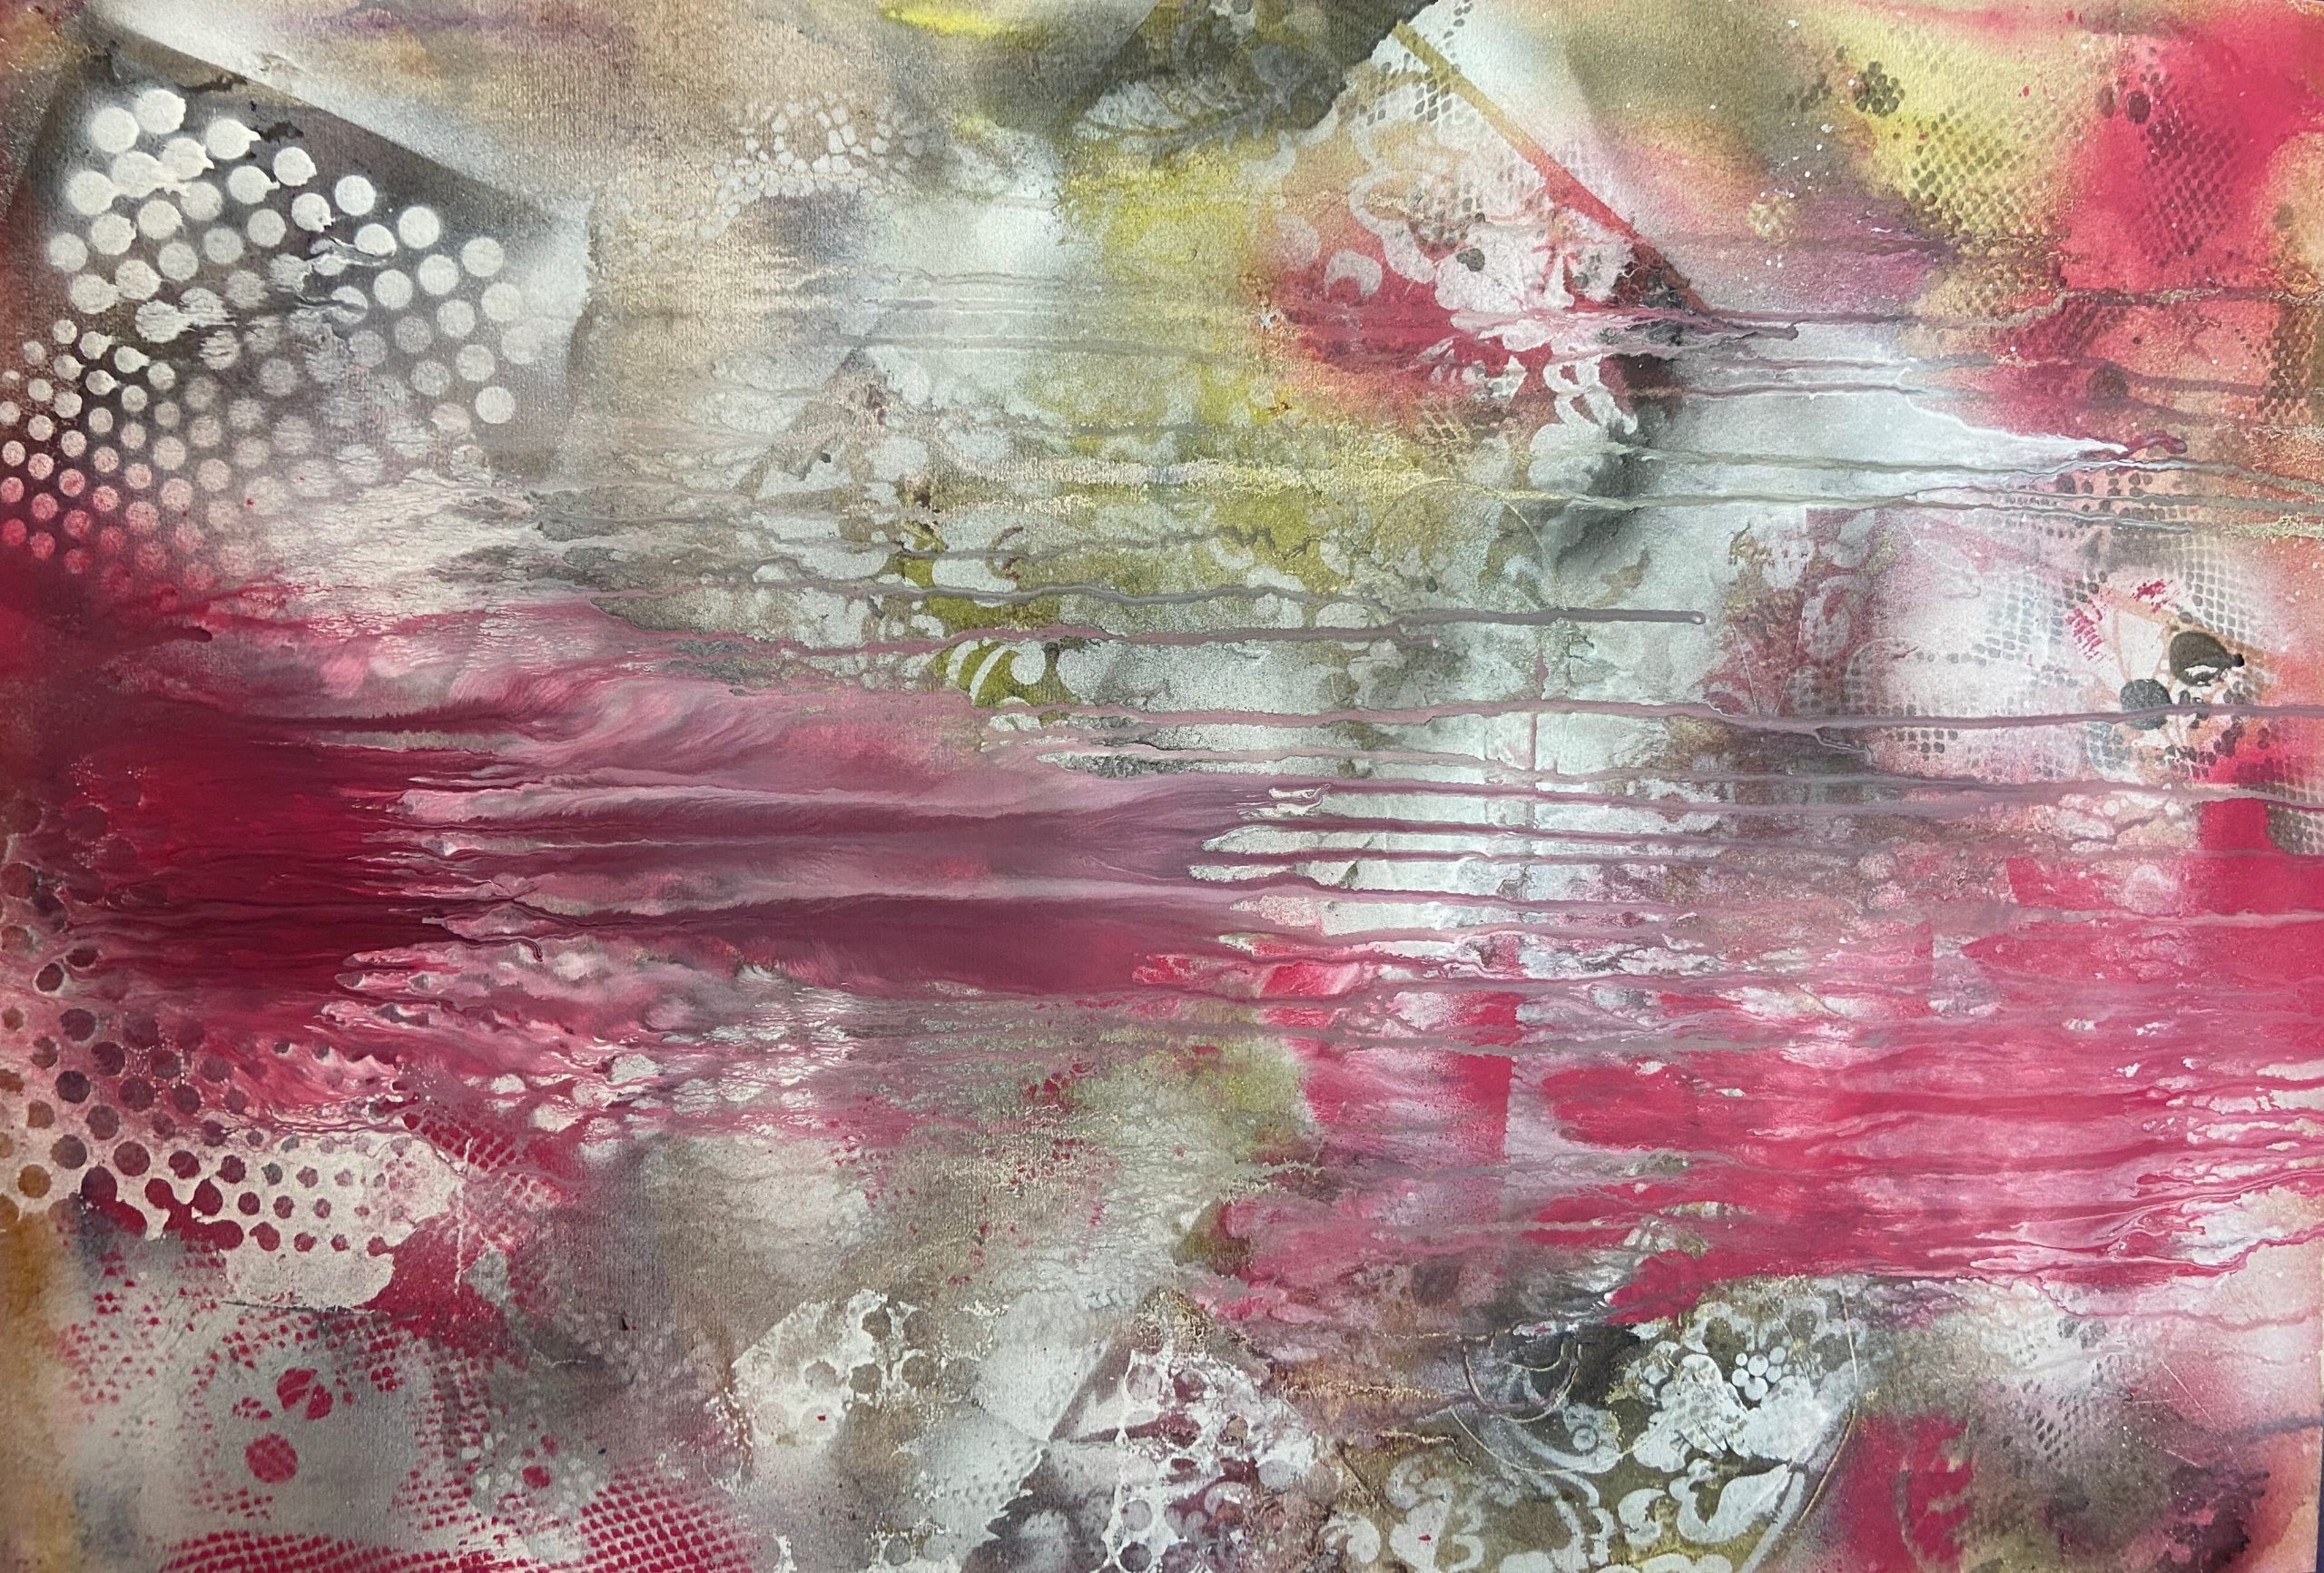 An abstract pinting using spray paint and stencils